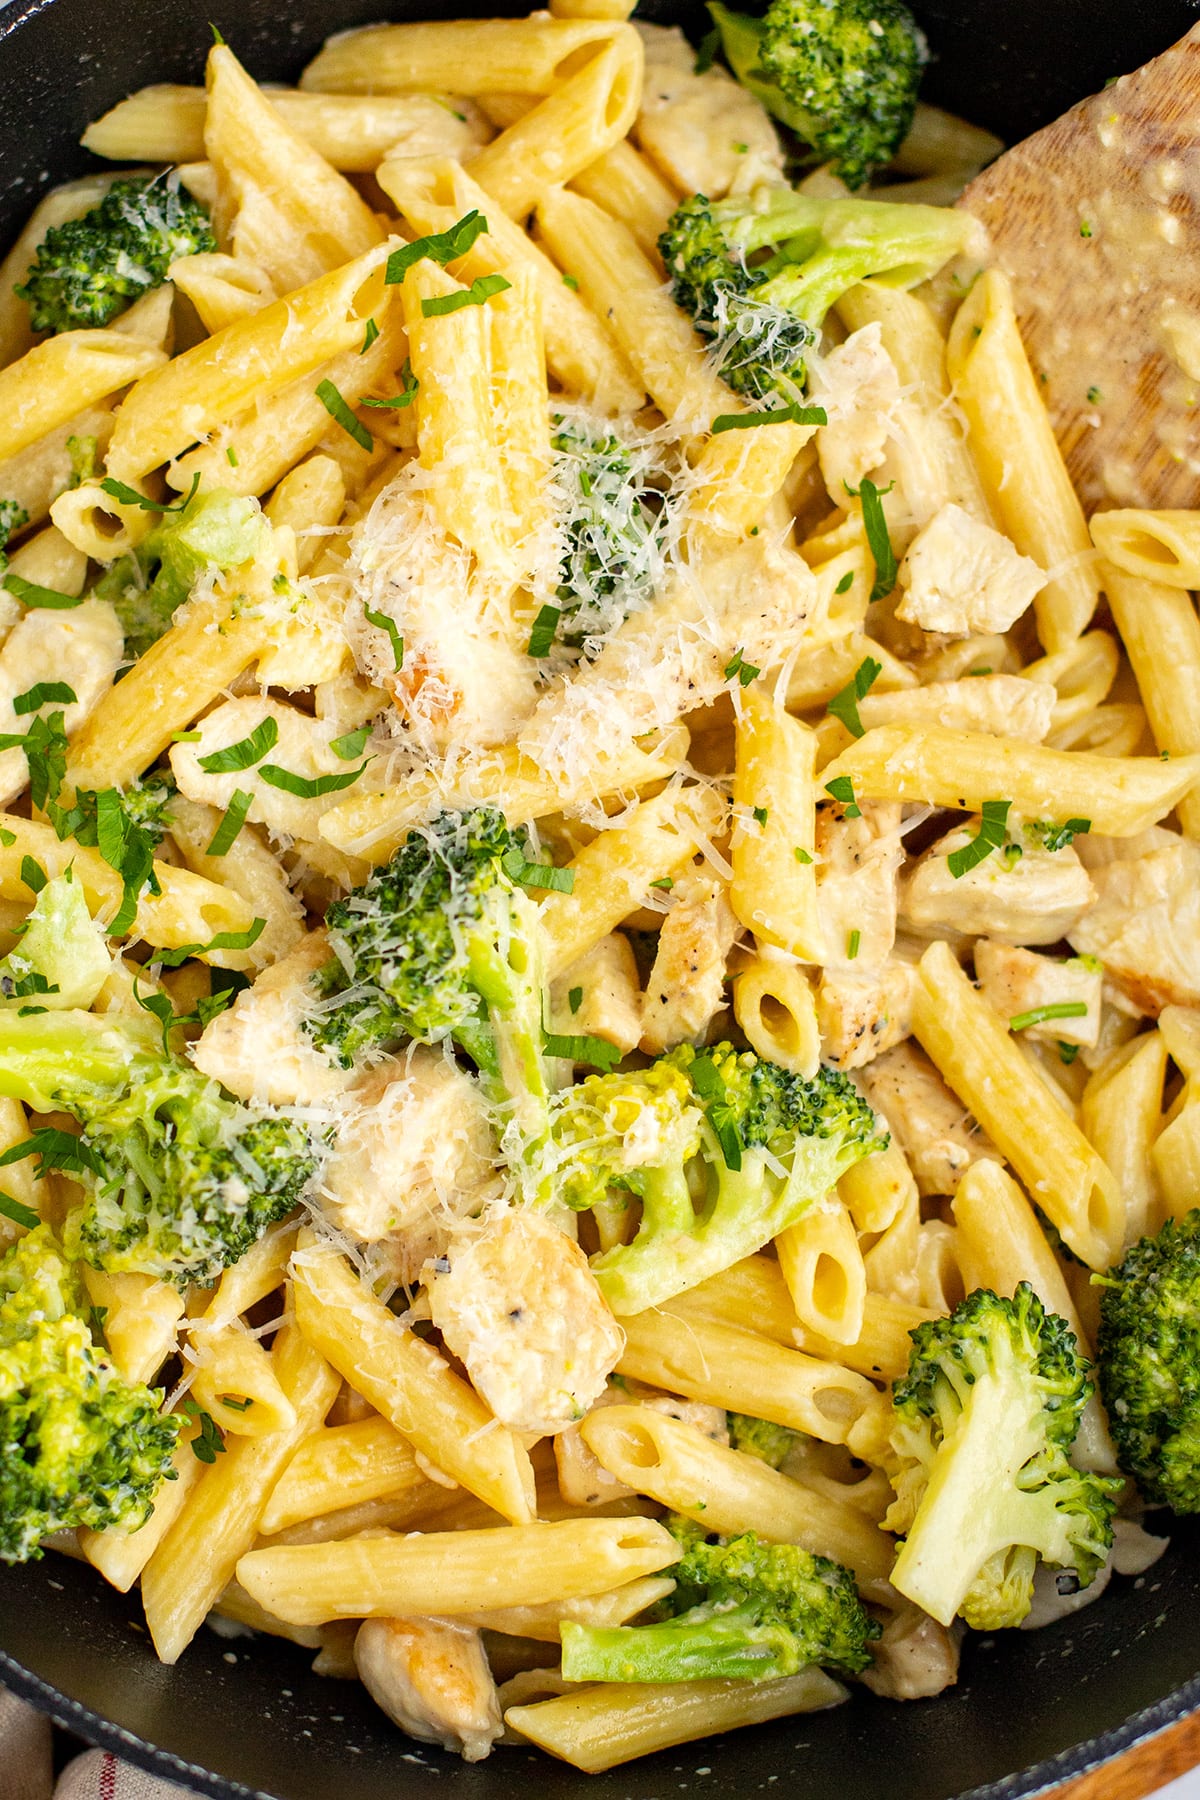 Penne pasta coasted in Alfredo sauce with chicken and broccoli, sprinkled with Parmesan cheese. 